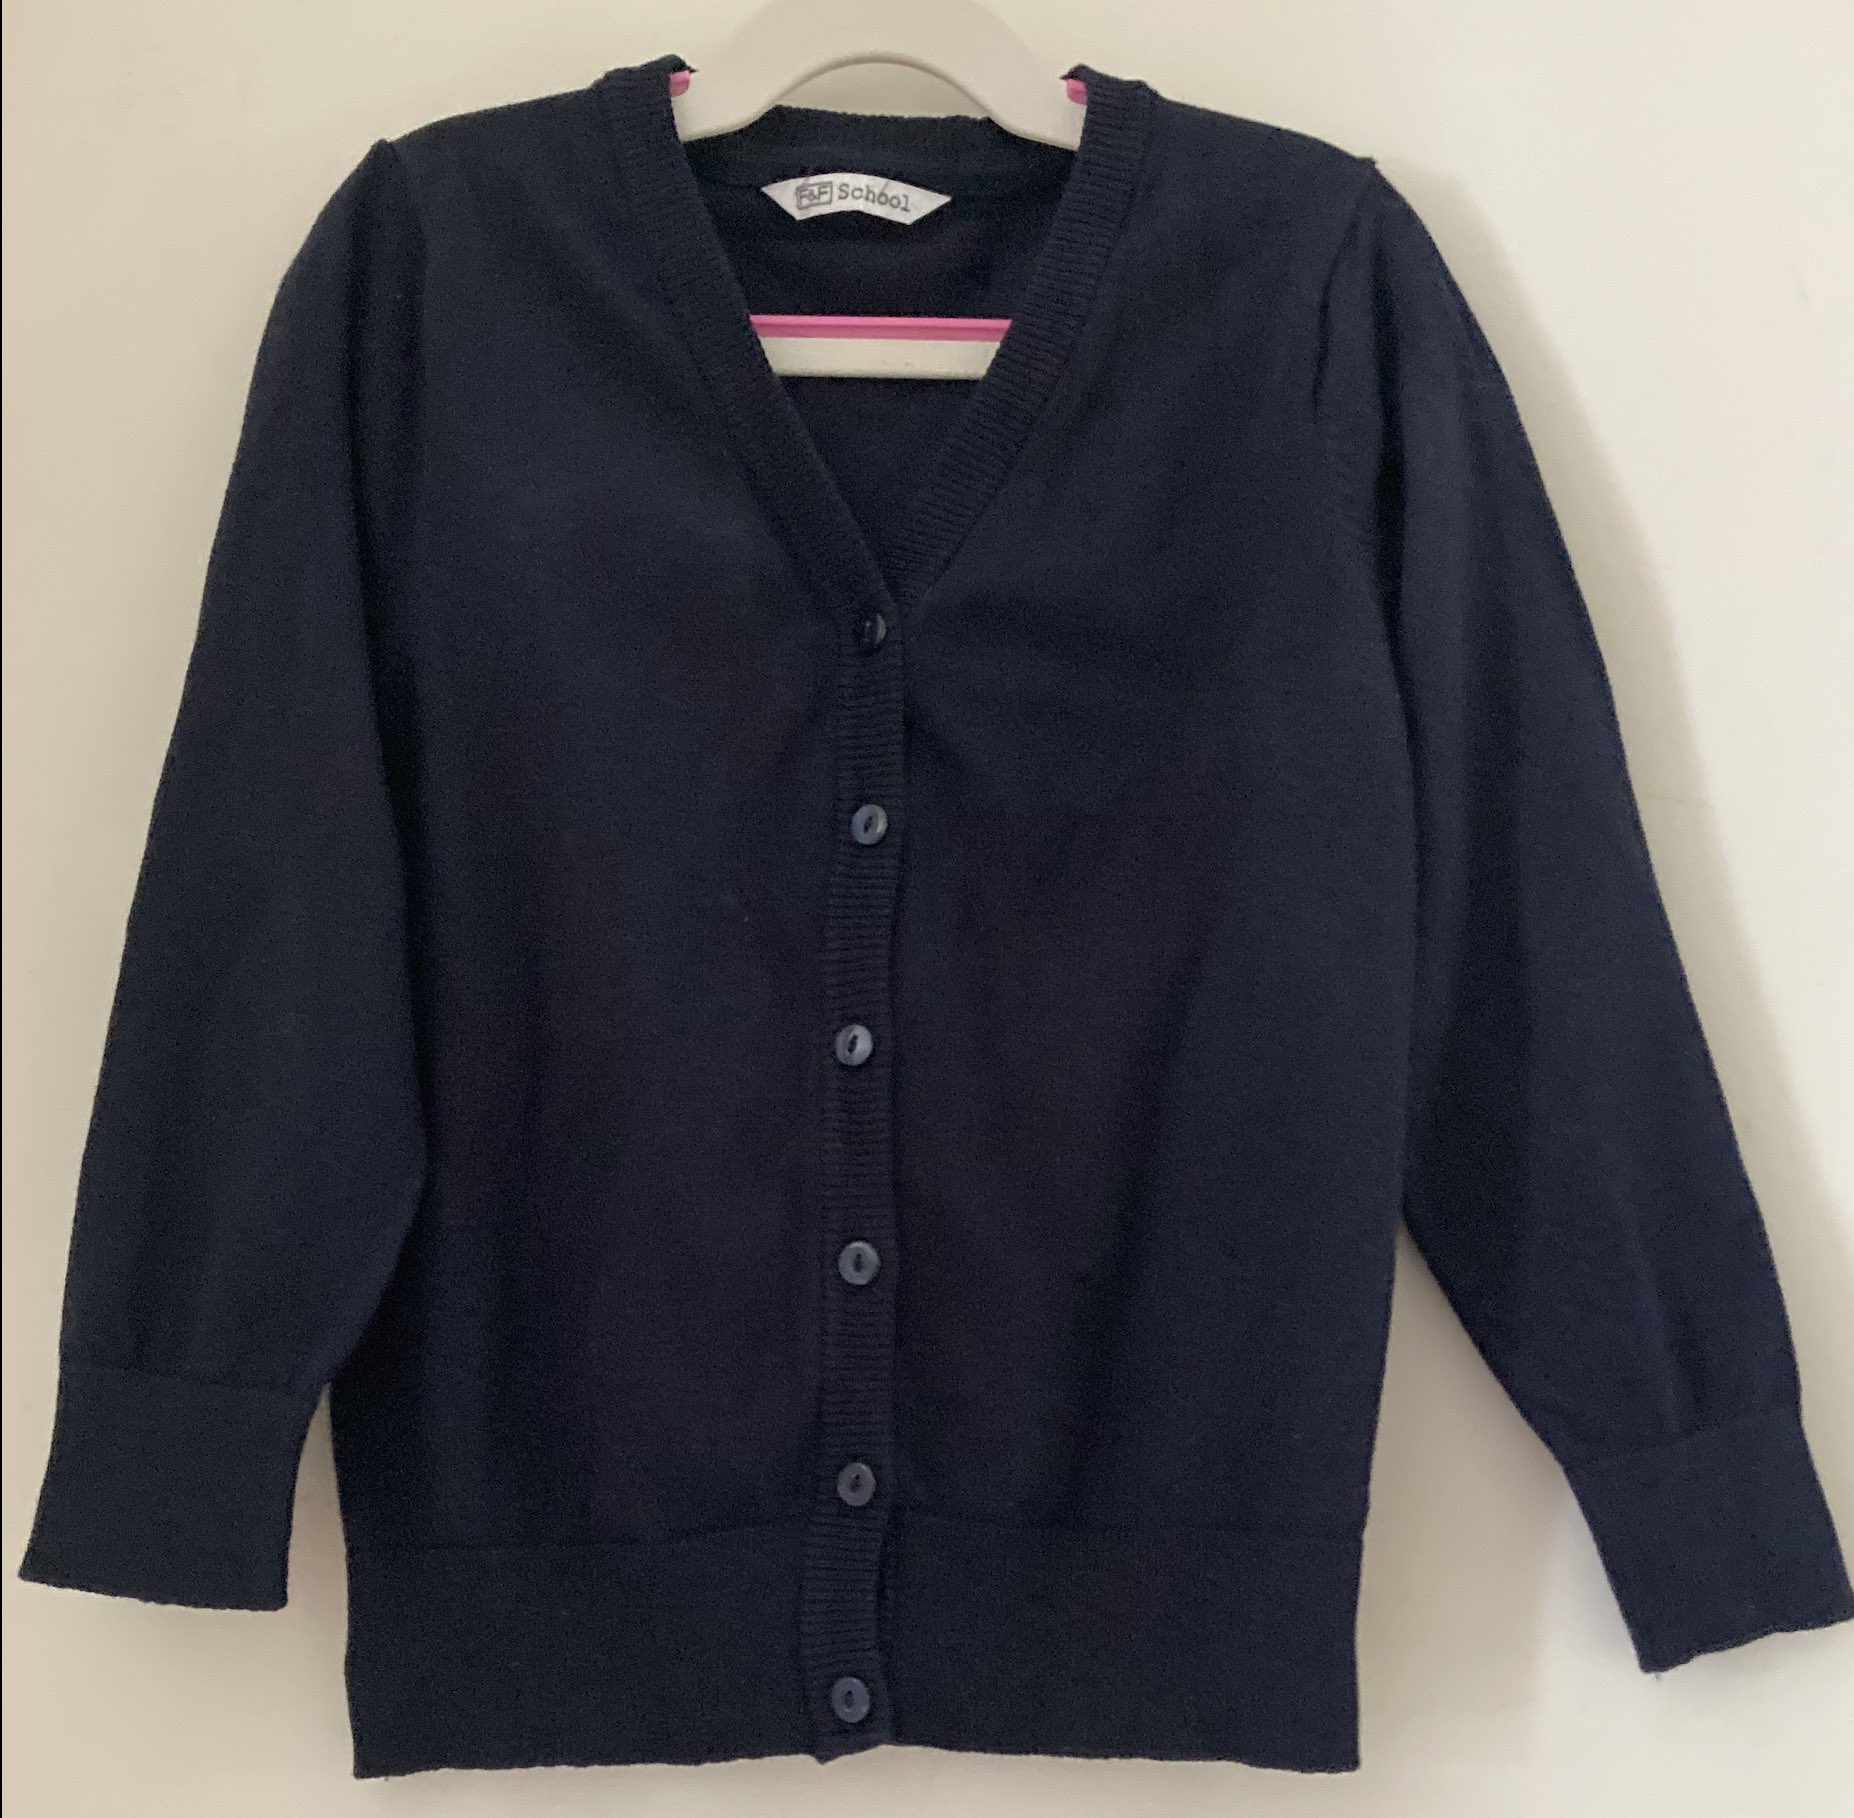 Girls' Navy V-neck Cardigan, Button Front 5-6 Y